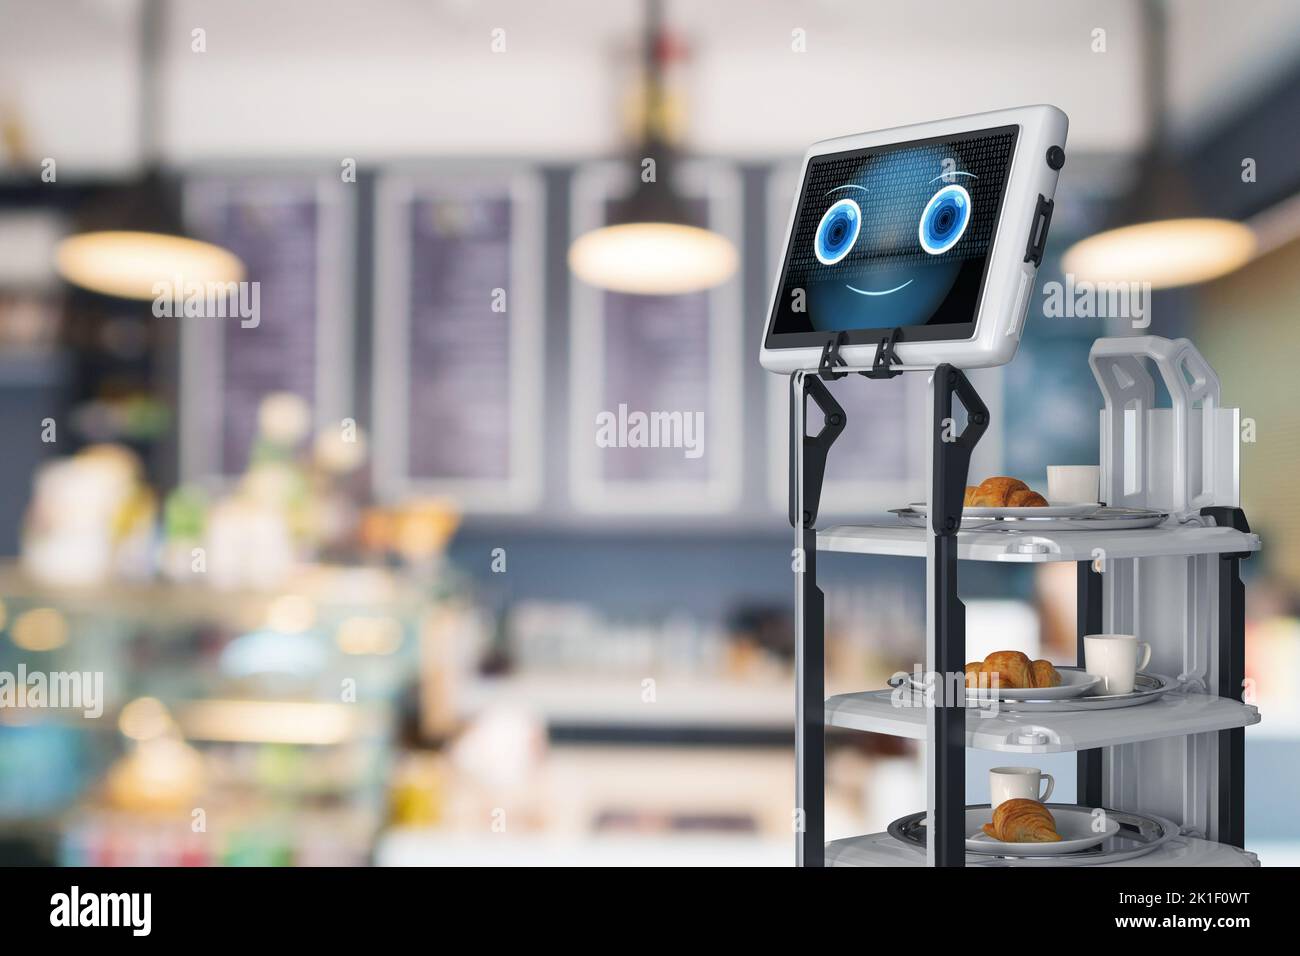 Automation cafe with 3d rendering robotic assistant or service robot serve food Stock Photo